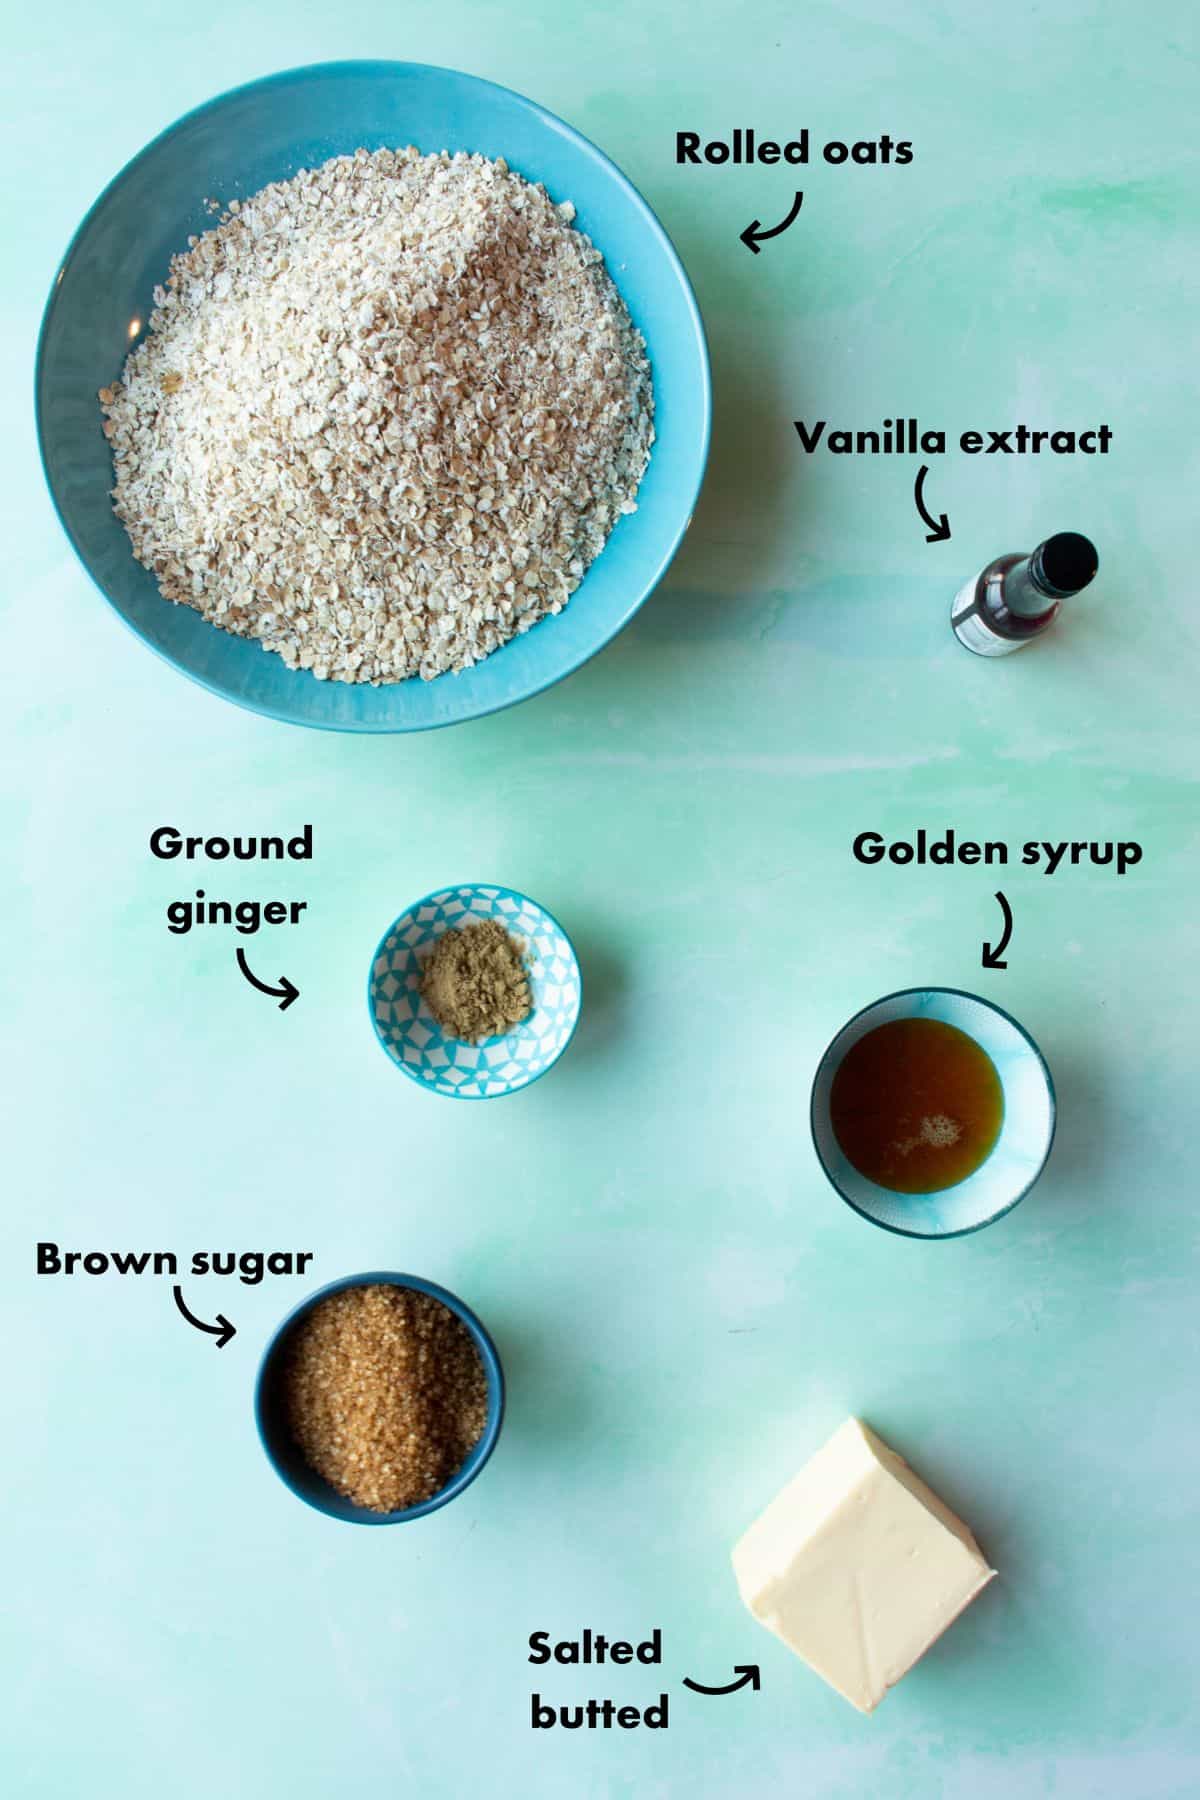 Ingredients to make the flapjacks load out on a pale blue background and labelled.